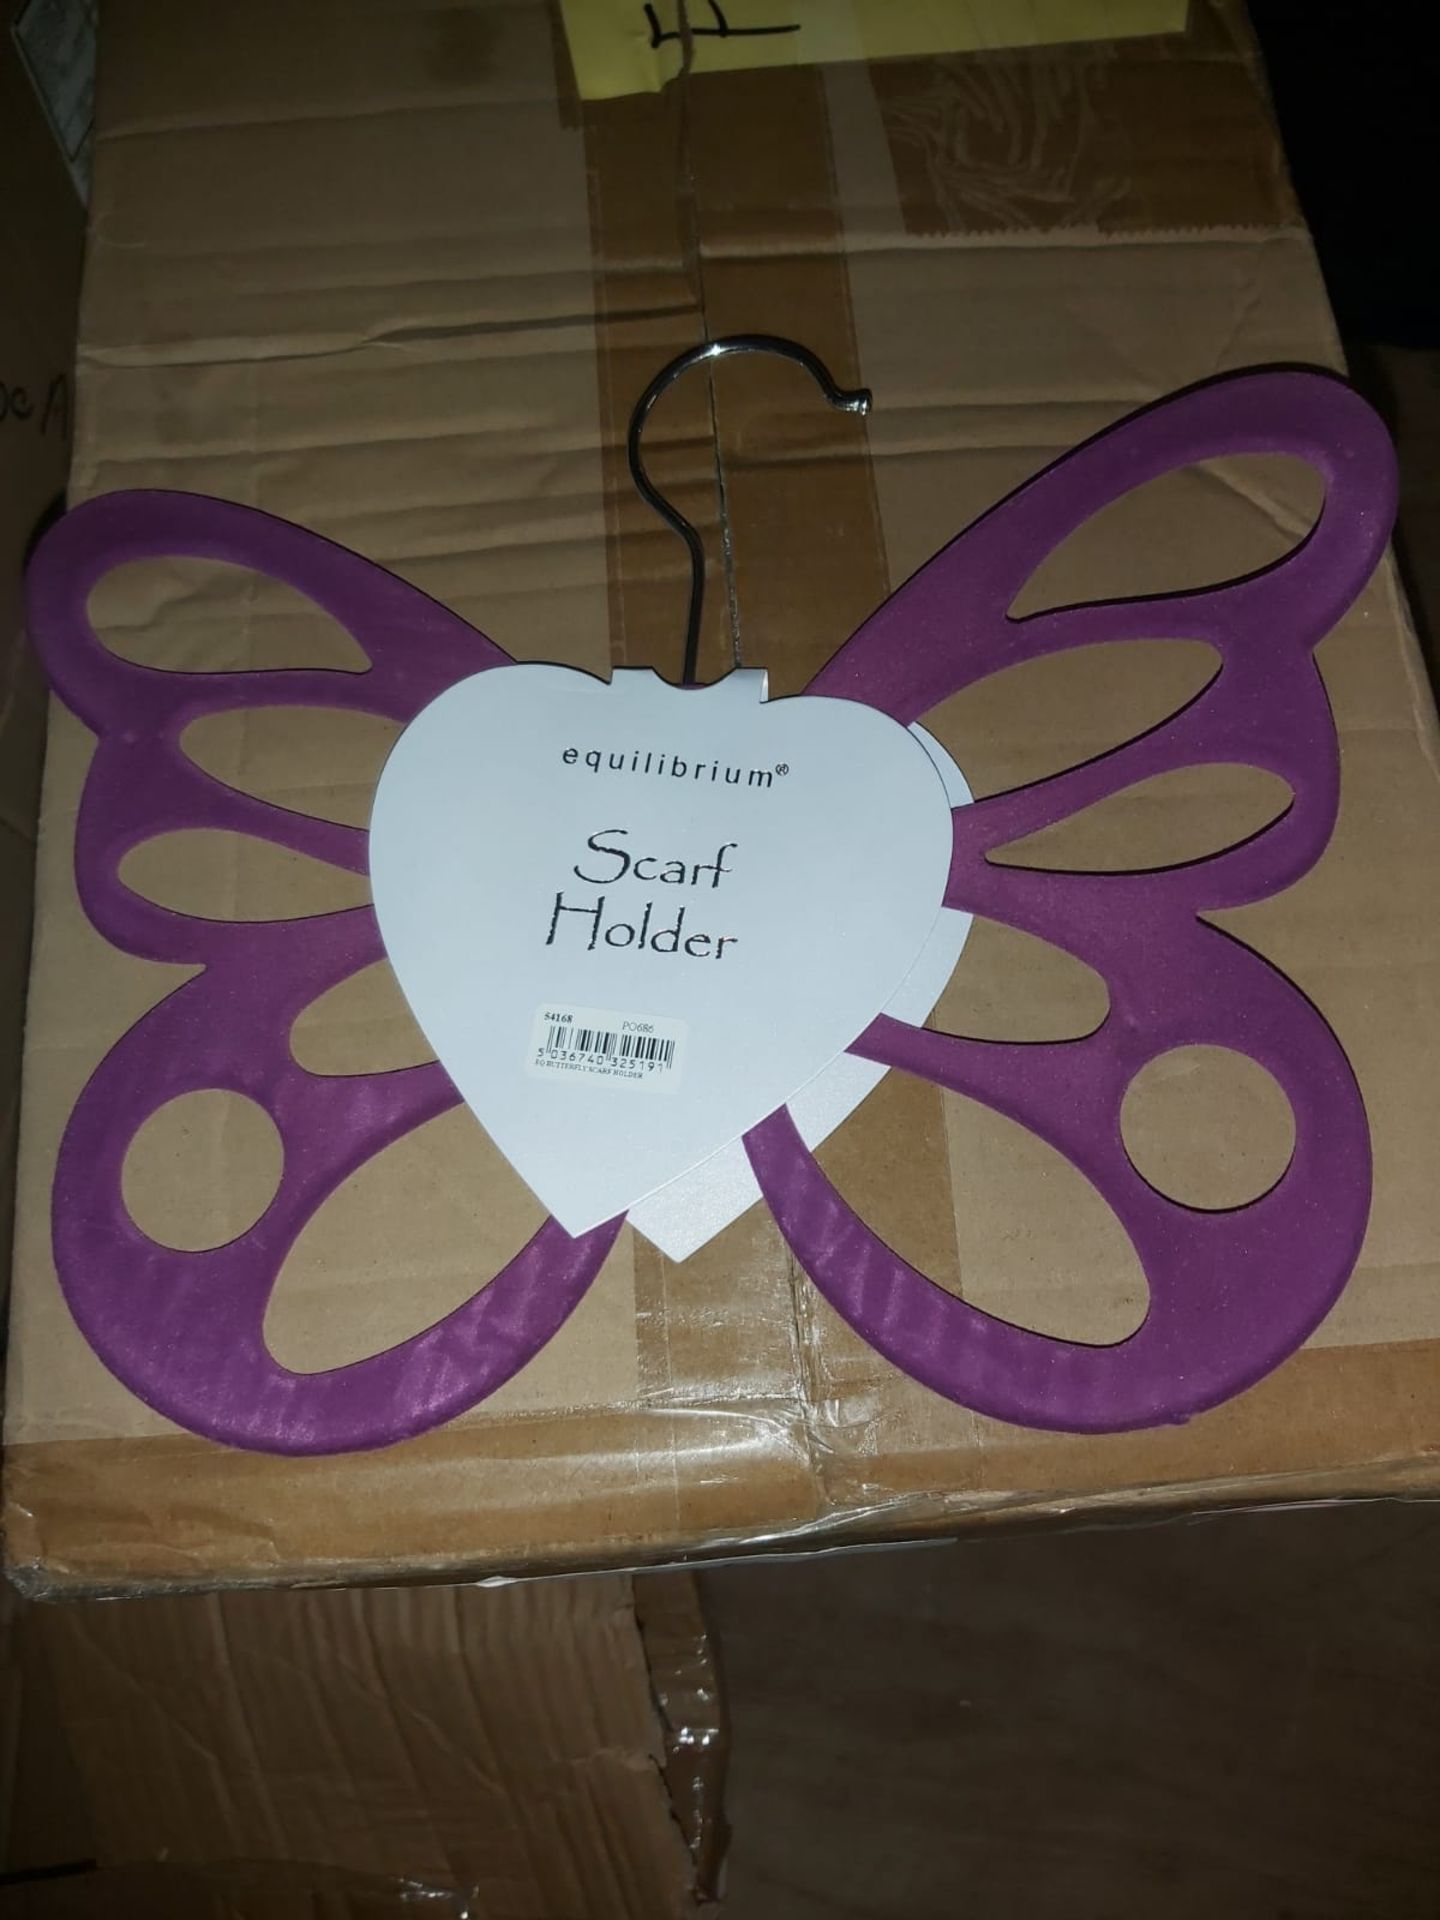 Equilibrium Velvet Butterfly scarf hangers over 300 job lot - Image 5 of 5